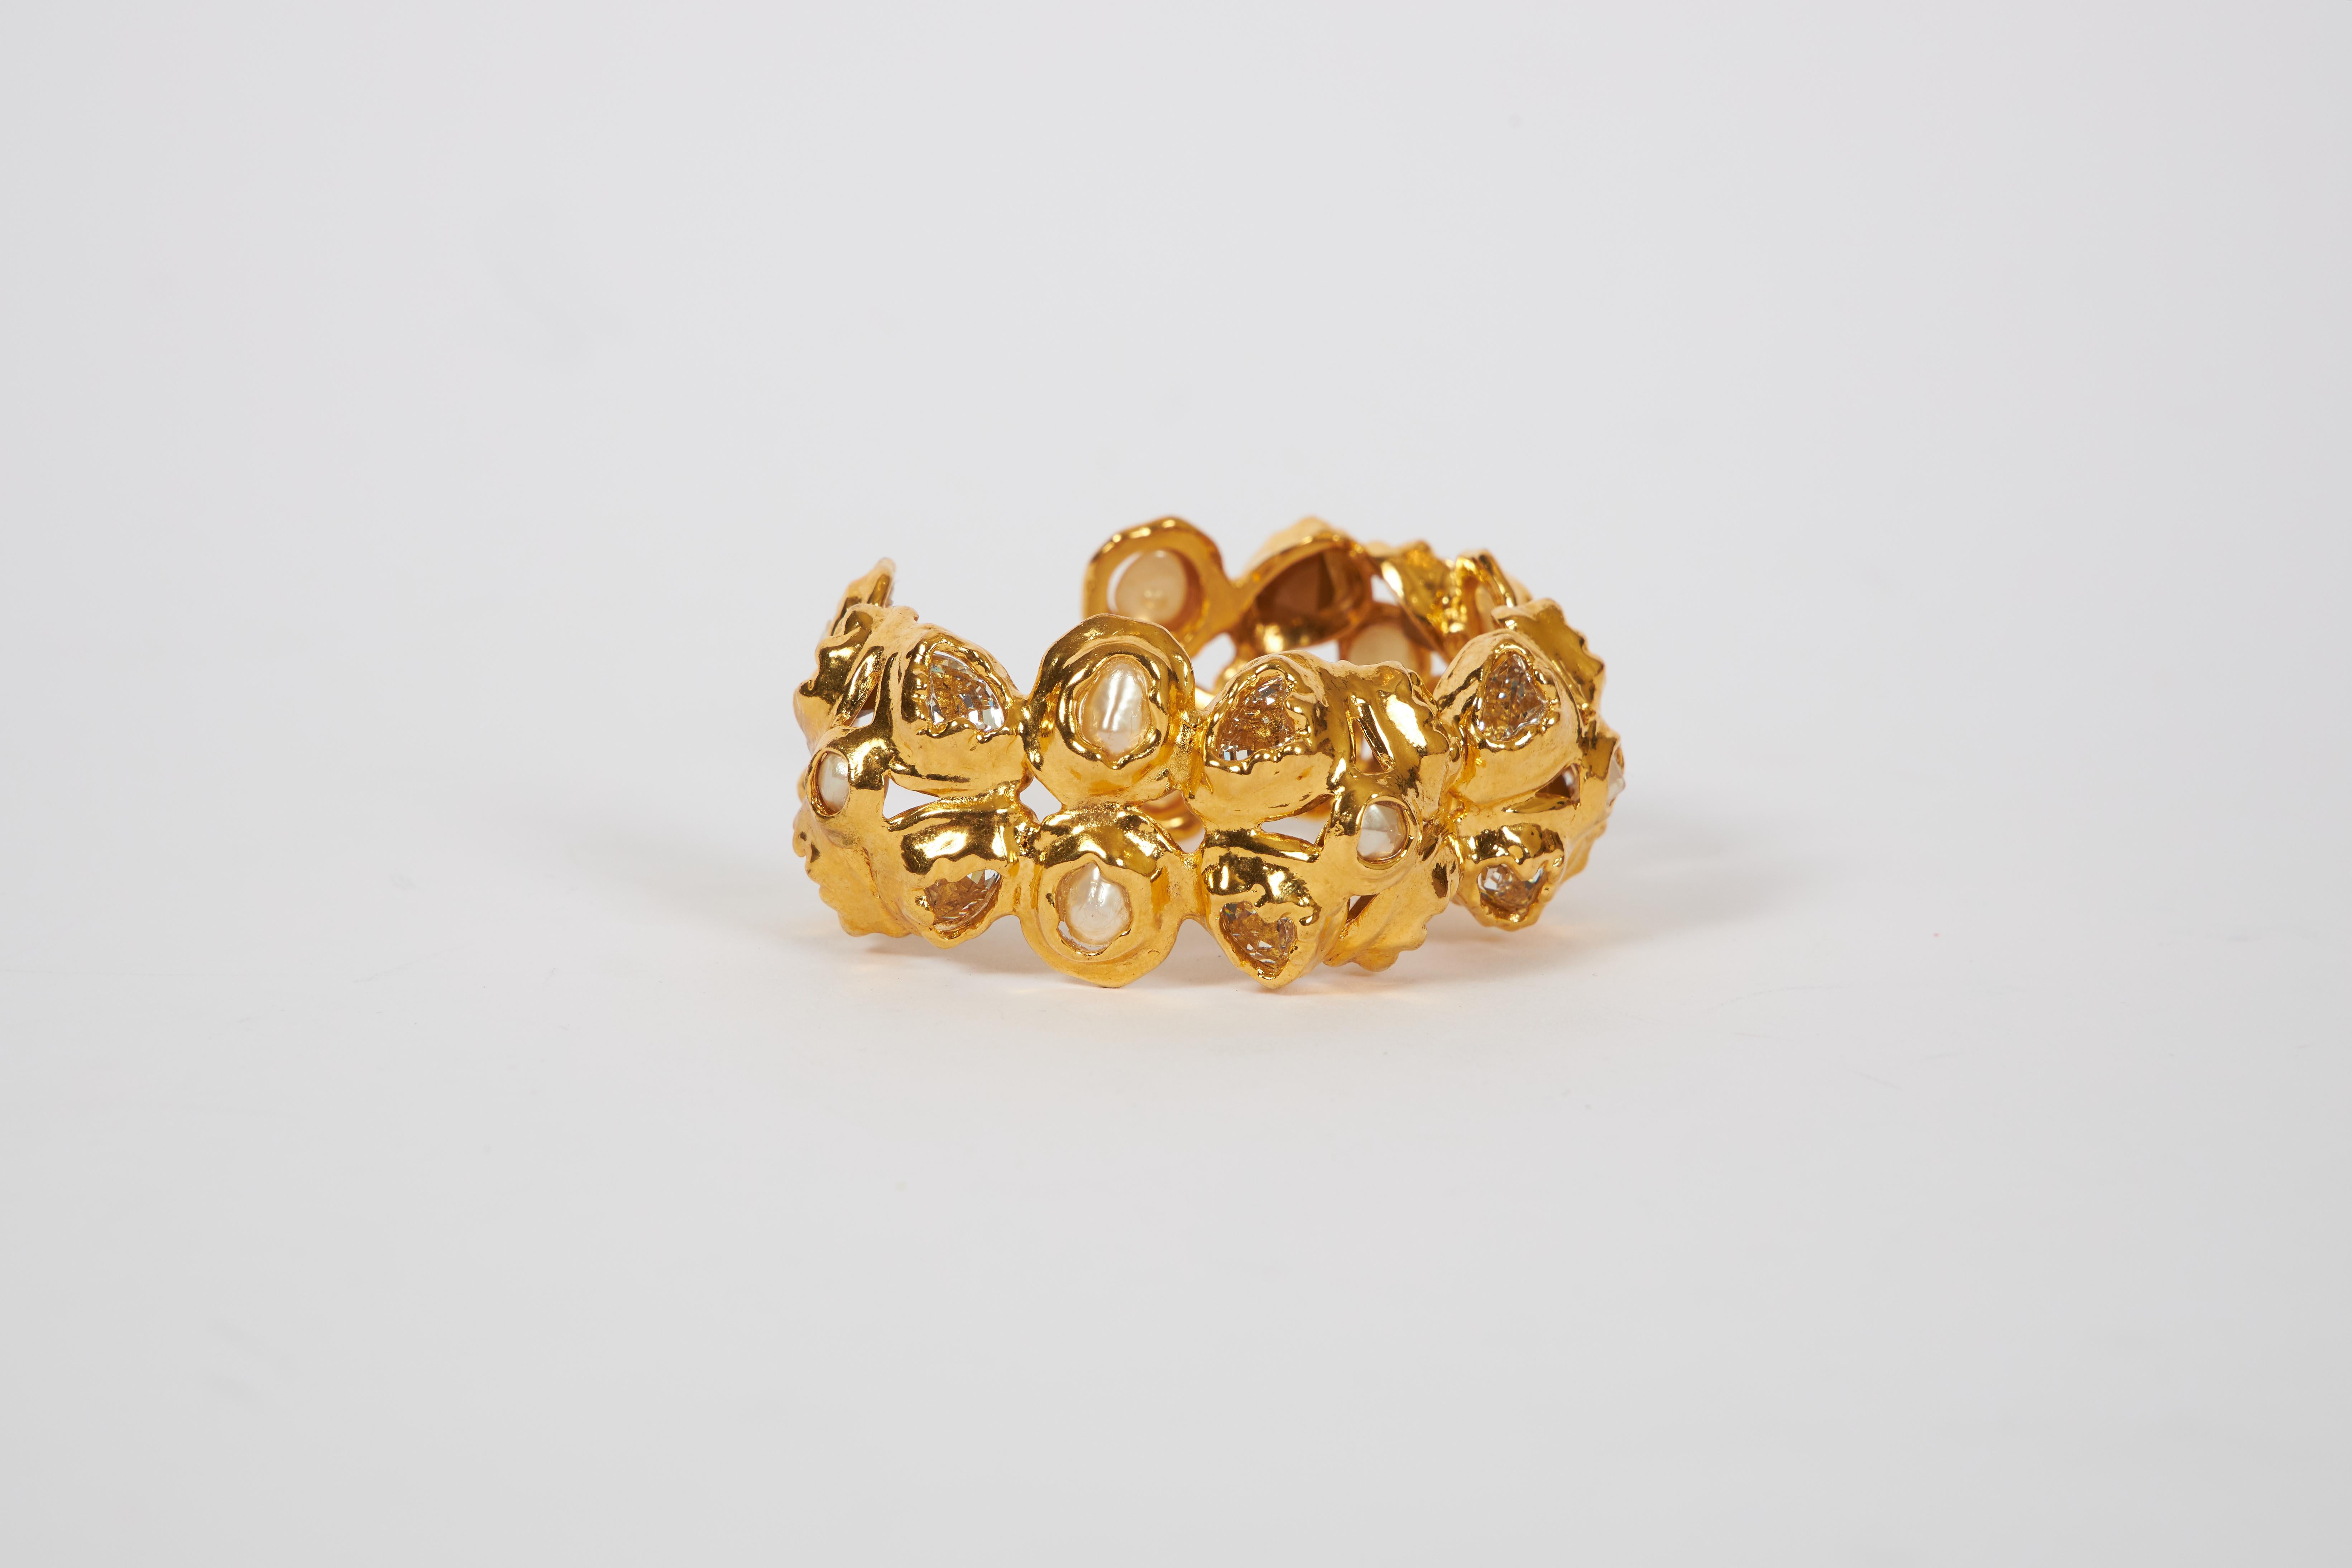 Chanel textured gold tone metal cuff set with faux pearls. Collection 29. Cuff opening, 1.25